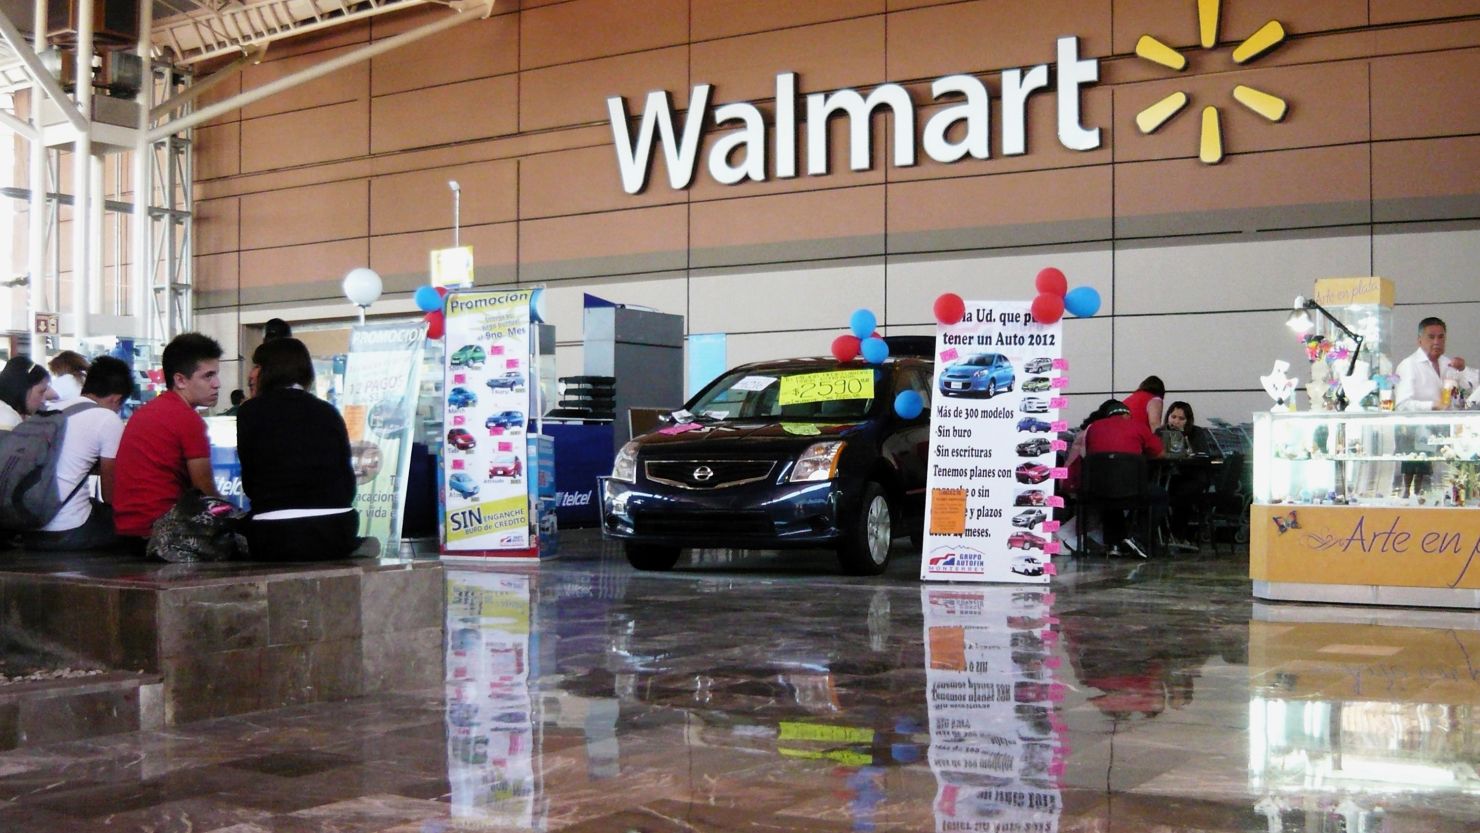 Wal-Mart store signage is seen from within the store on April 23, 2012 in Mexico City, Mexico.